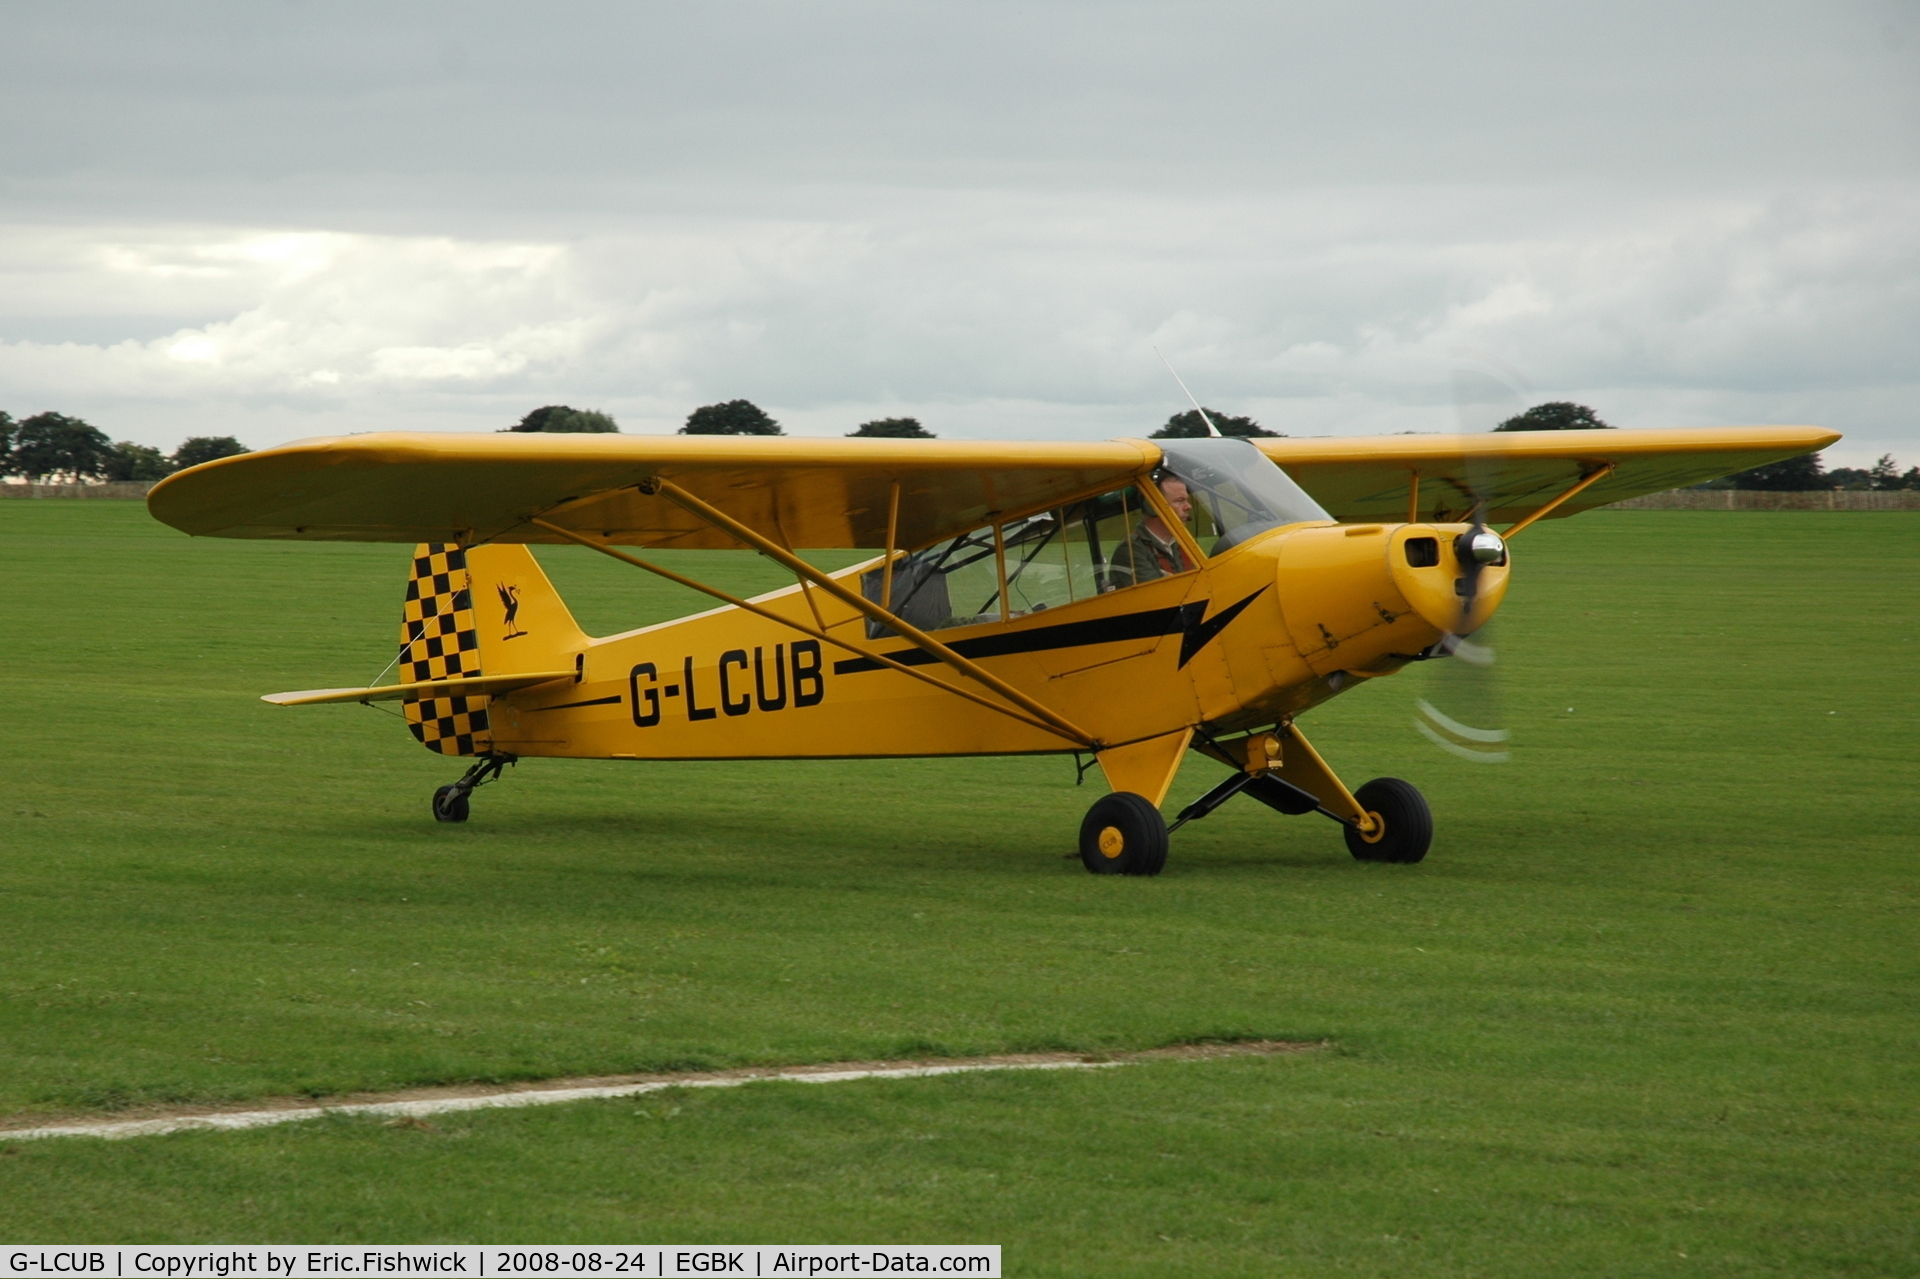 G-LCUB, 1959 Piper L-18C Super Cub (PA-18-95) C/N 18-1631, 3. G-LCUB at the Sywell Airshow 24 Aug 2008